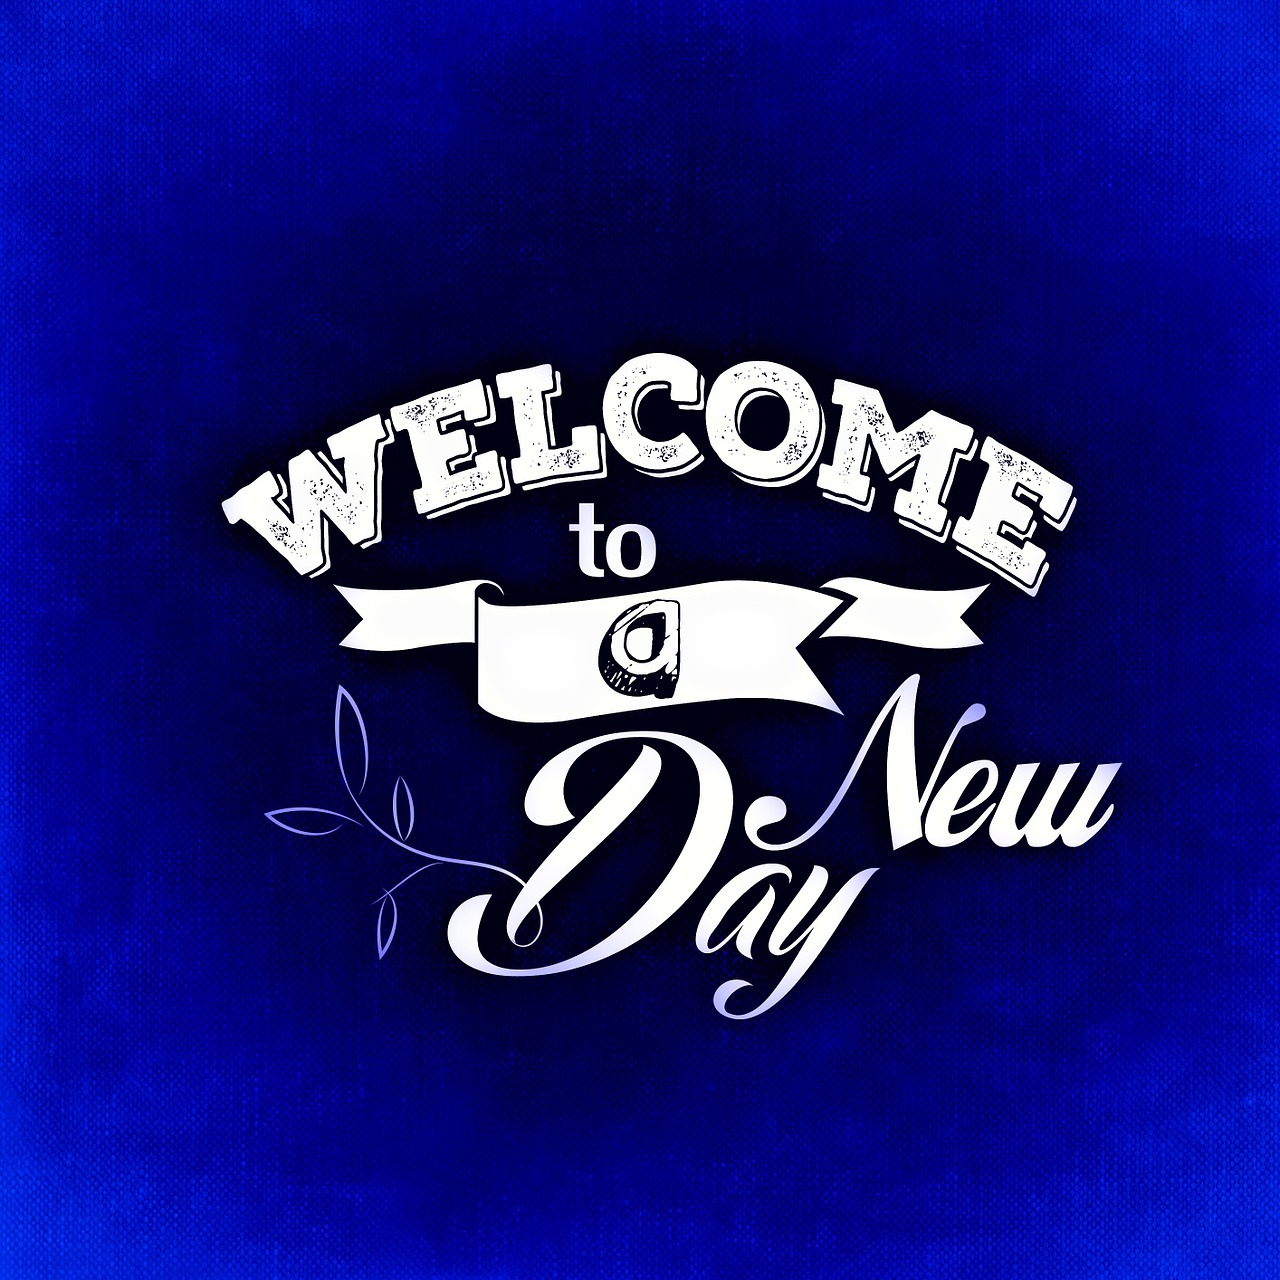 welcome day new free photo